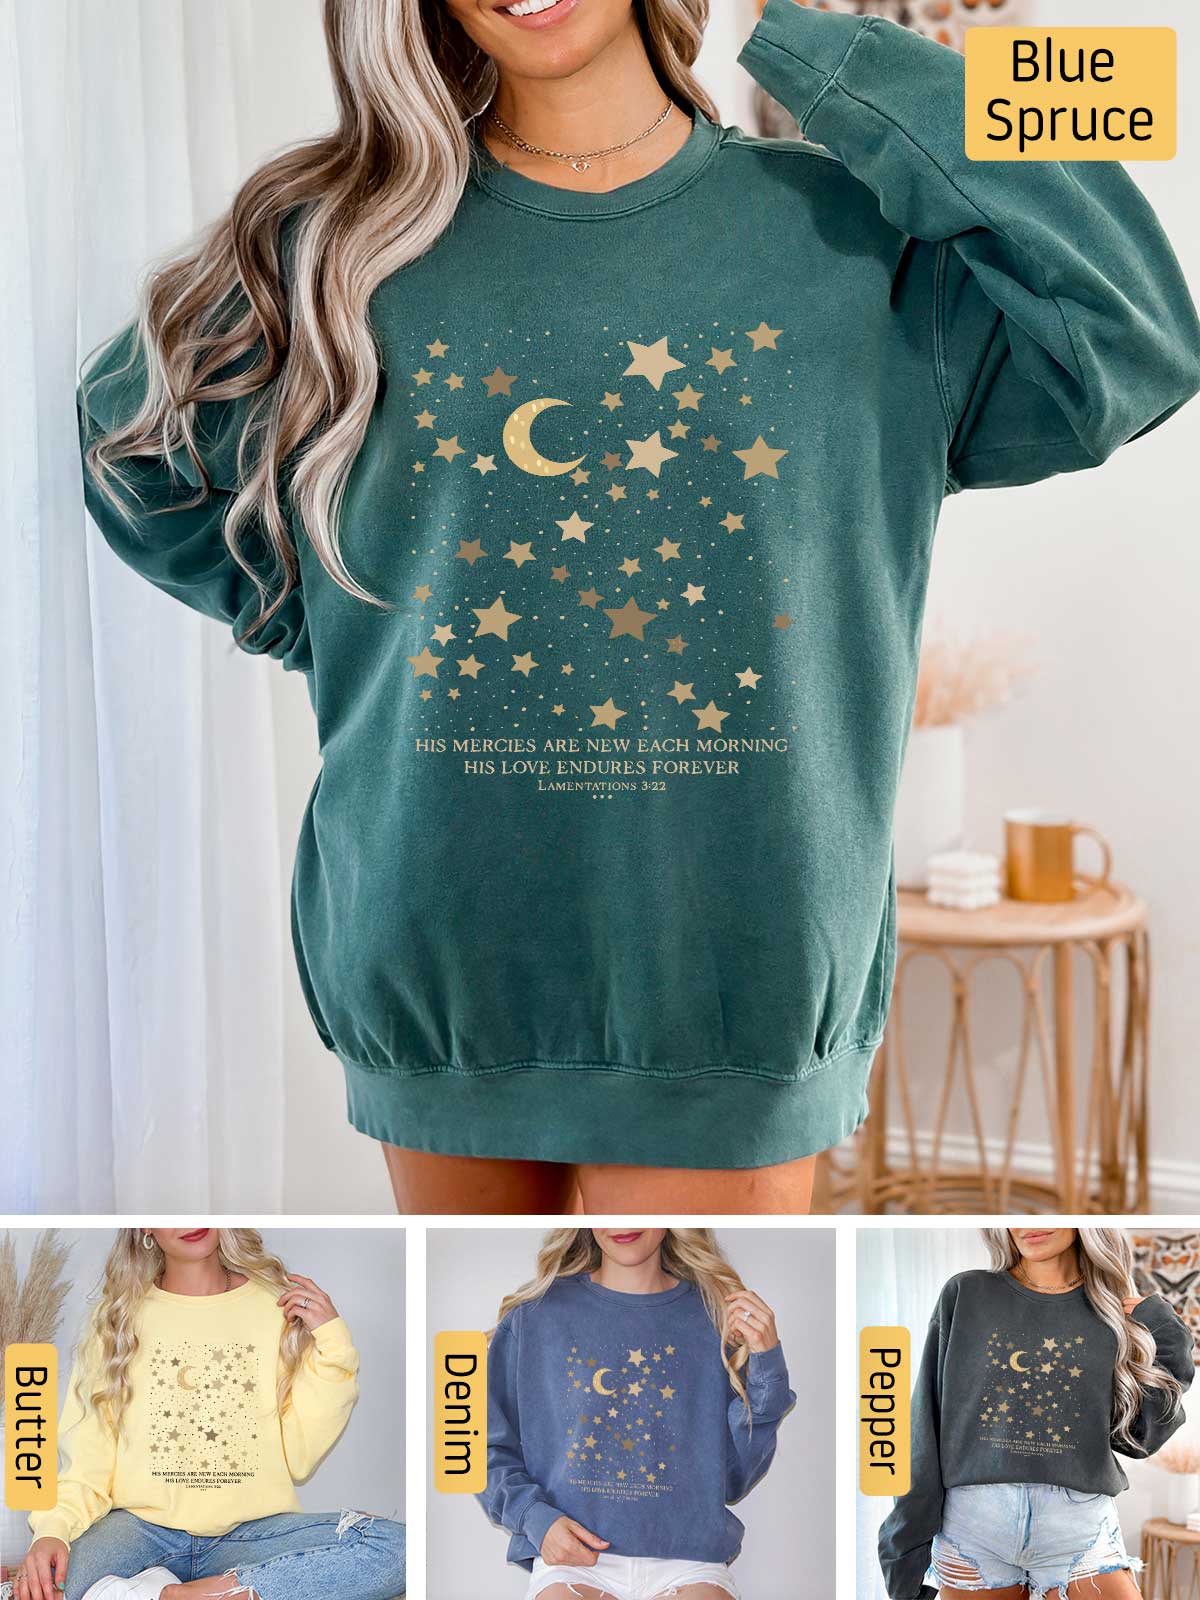 a woman wearing a green sweatshirt with gold stars on it